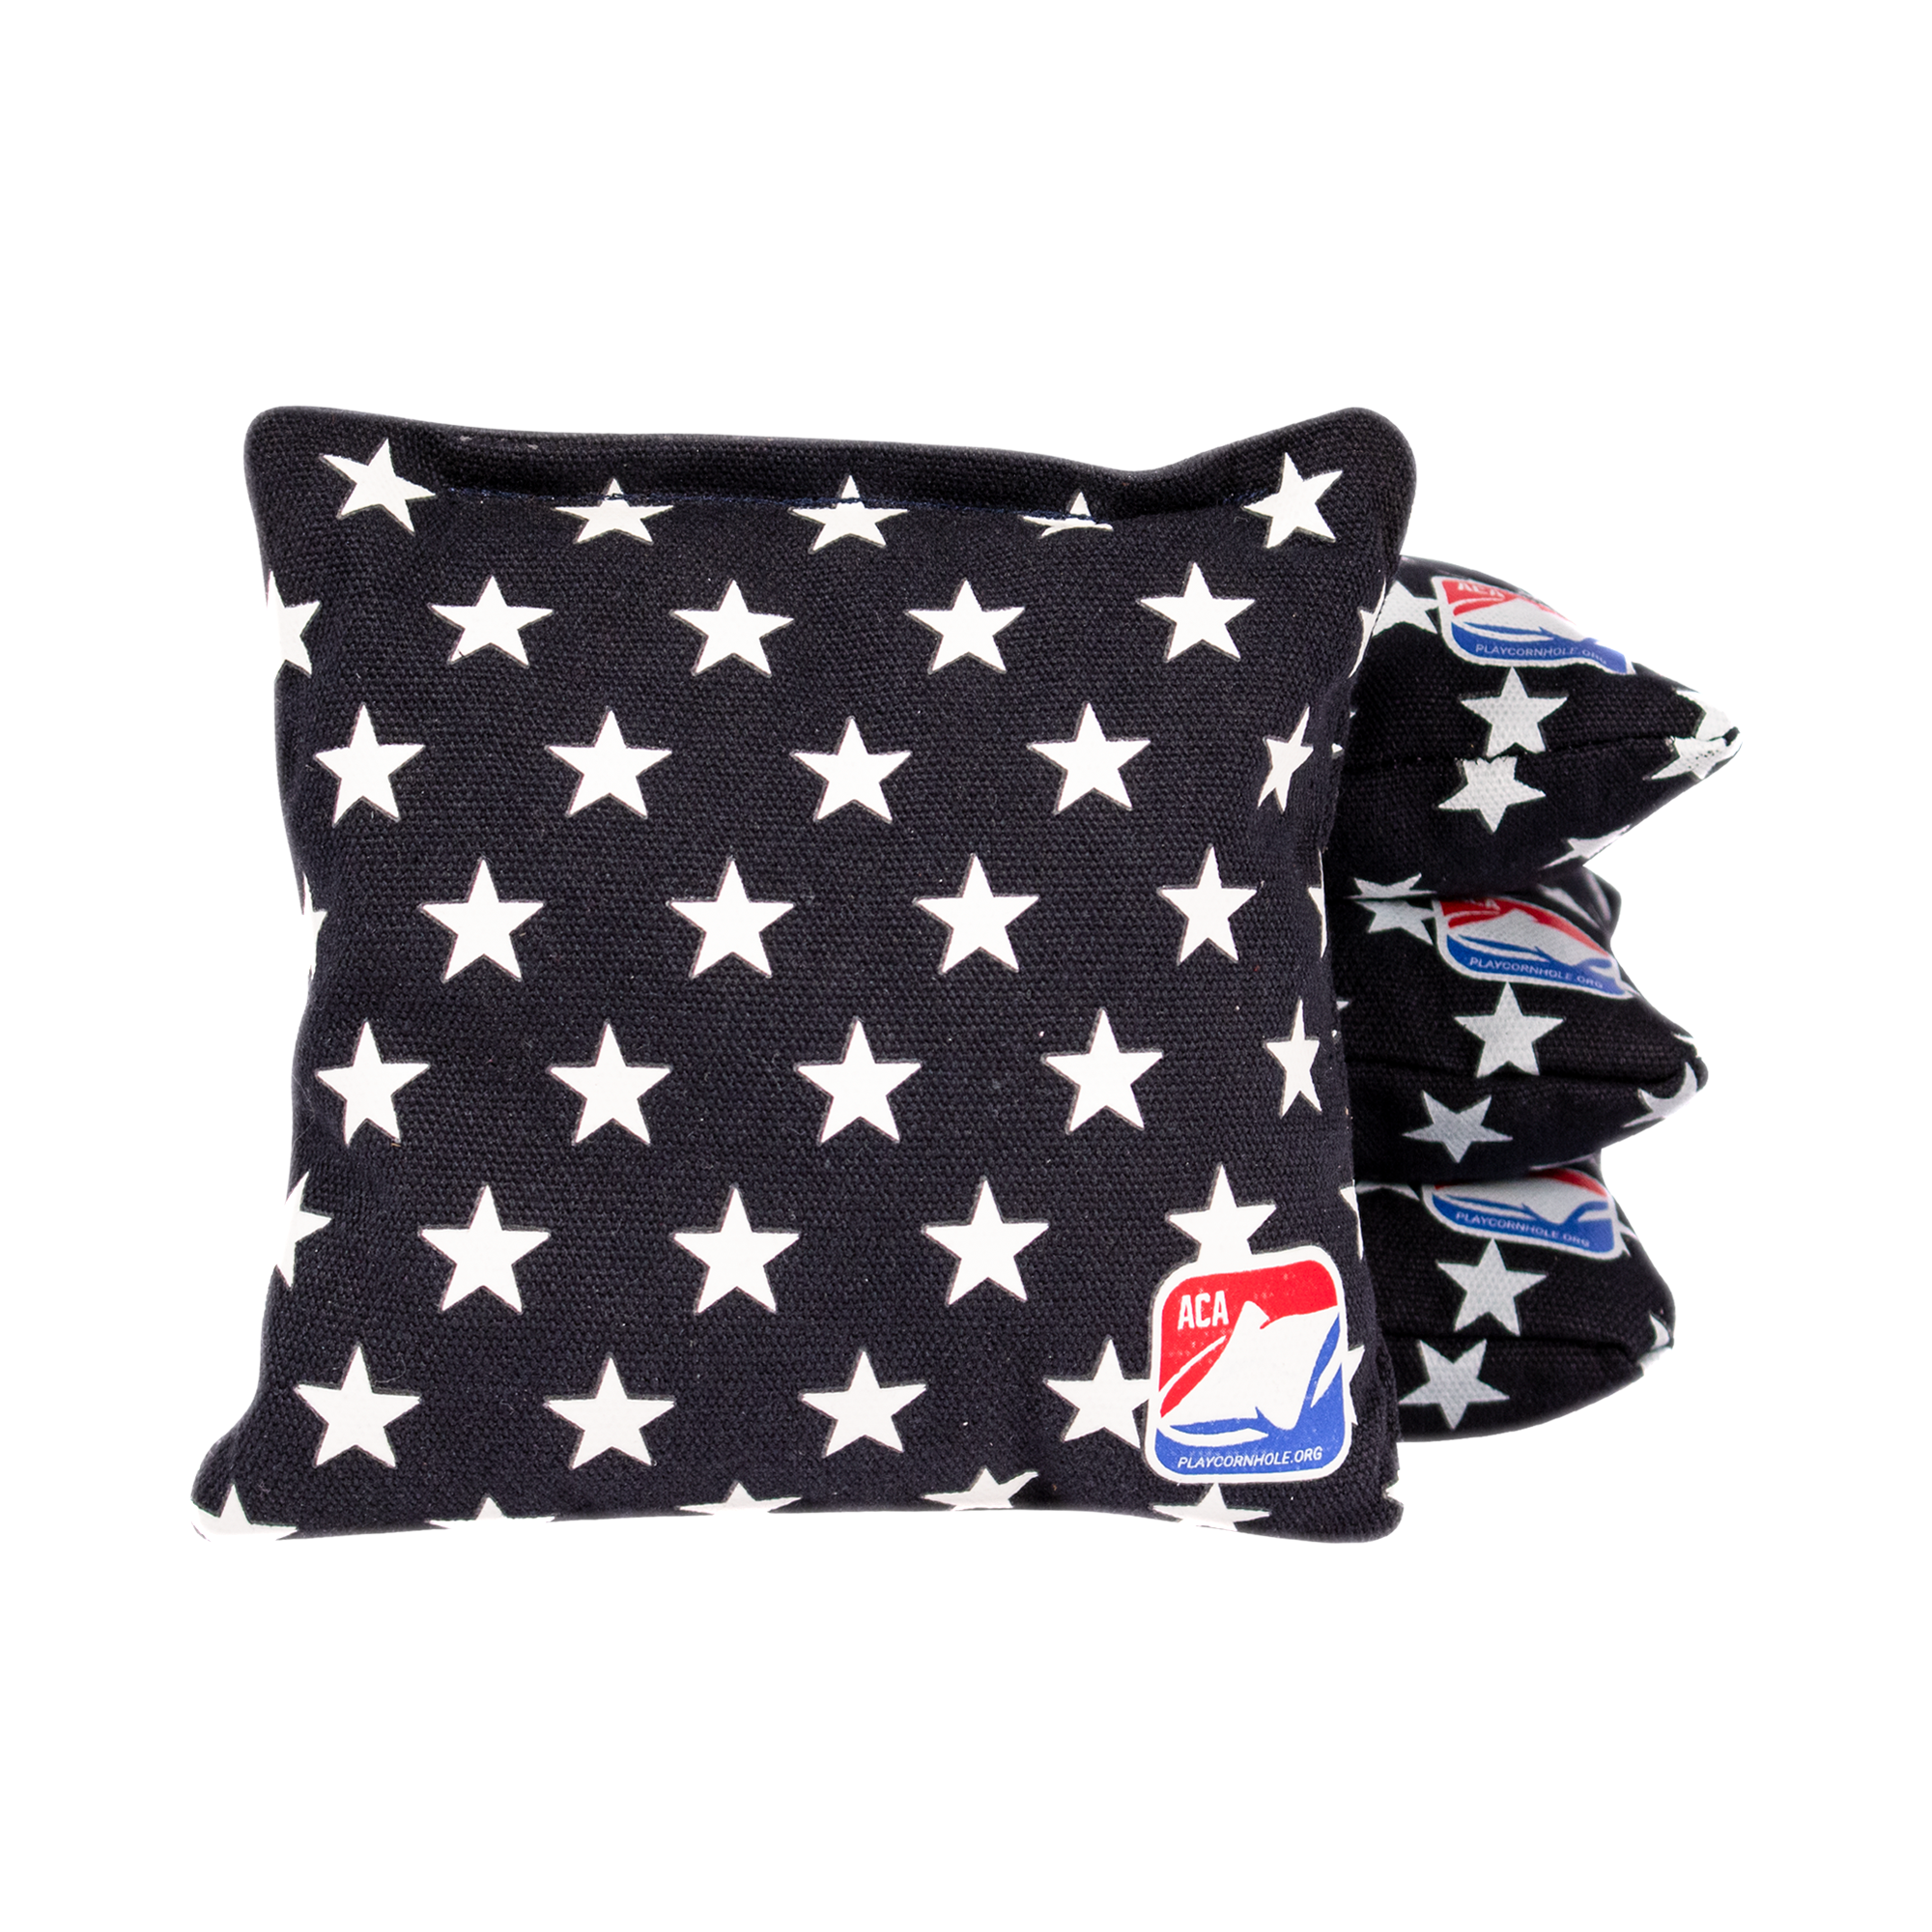 6-in Daily 66x Stars Competition Regulation Cornhole Bags